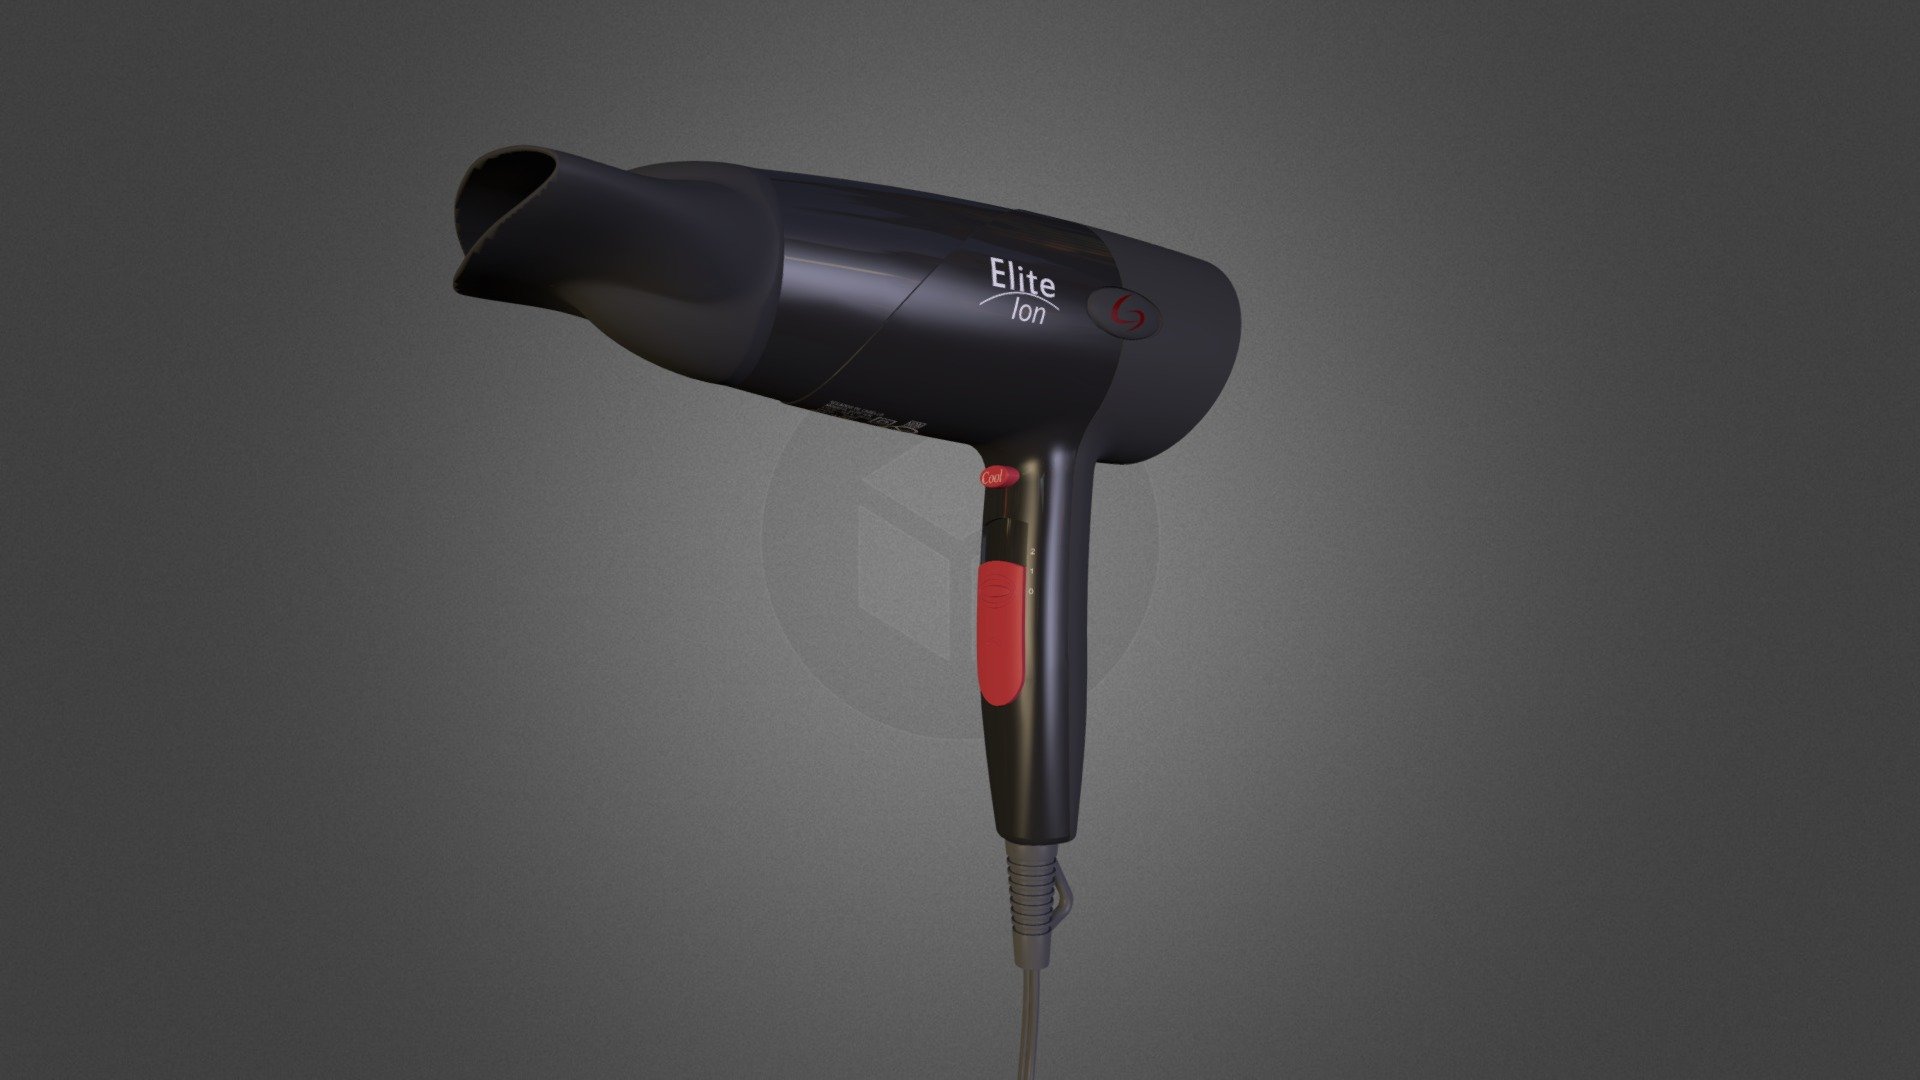 GA.MA Elite Ion hair dryer, done in Rhino 5.0.
Paid version: you can download it in these different formats: 3DM (original format), STP, OBJ, Blend 3d model